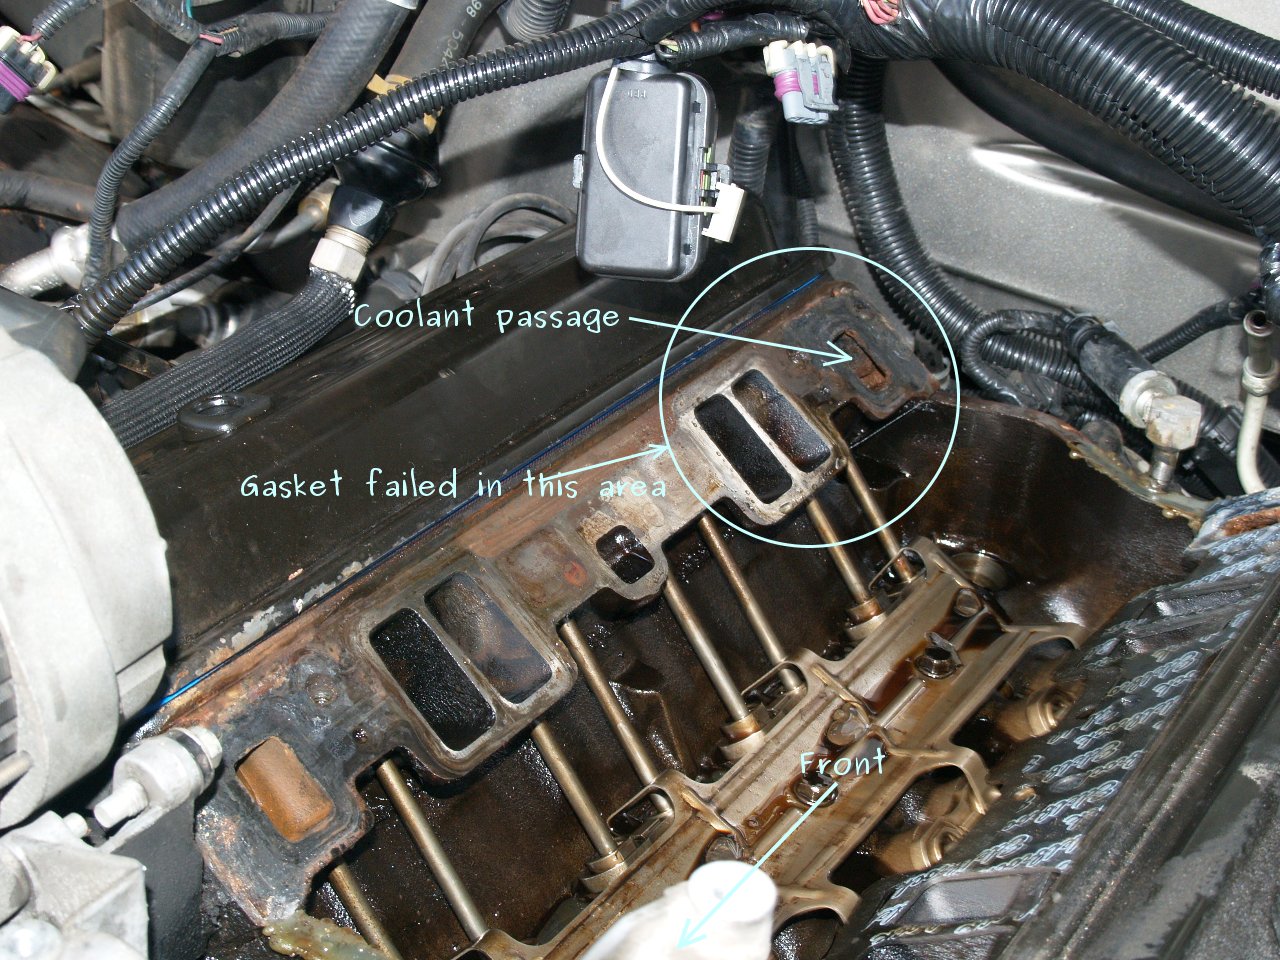 See B1218 in engine